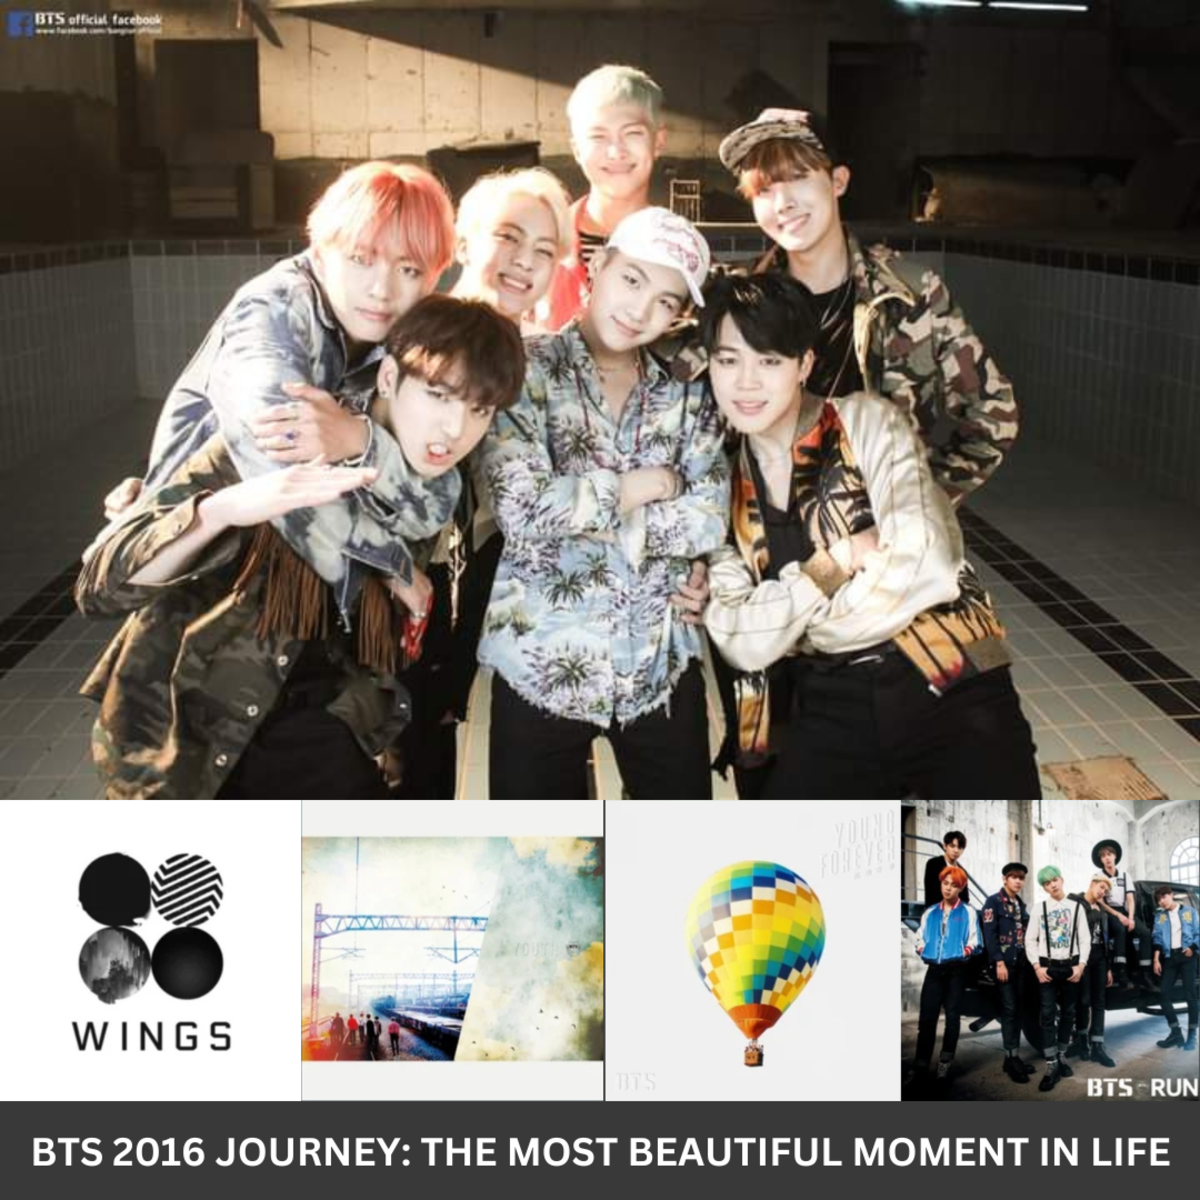 BTS 2016 Journey: The Most Beautiful Moment in Life